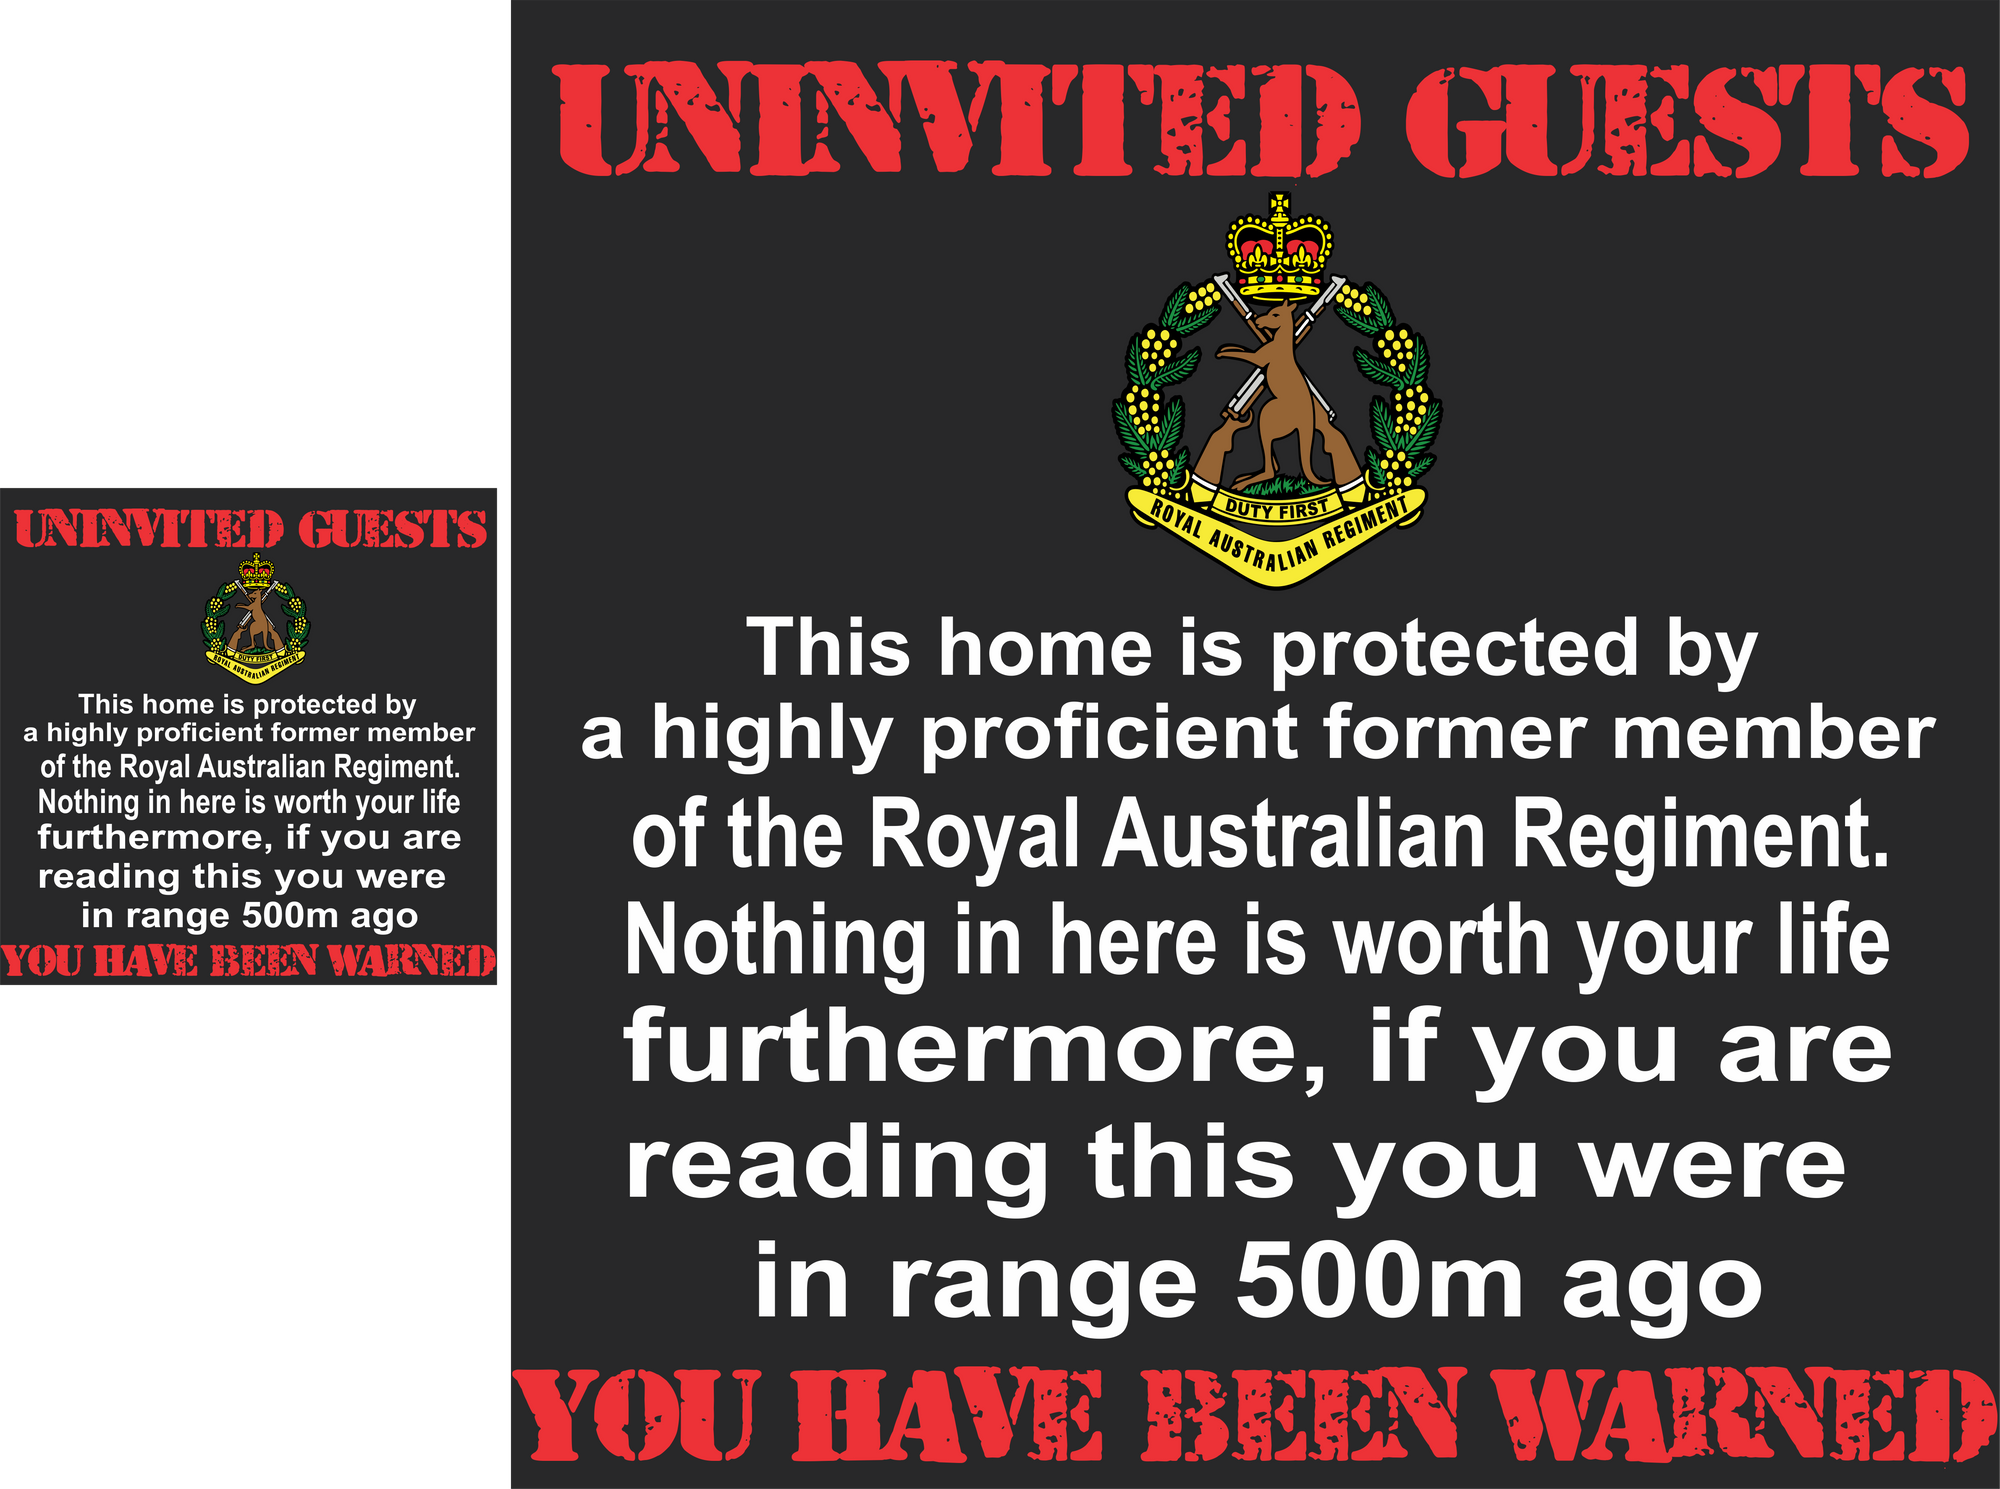 uninvited guests letterbox sticker 100 mm x 100 mm